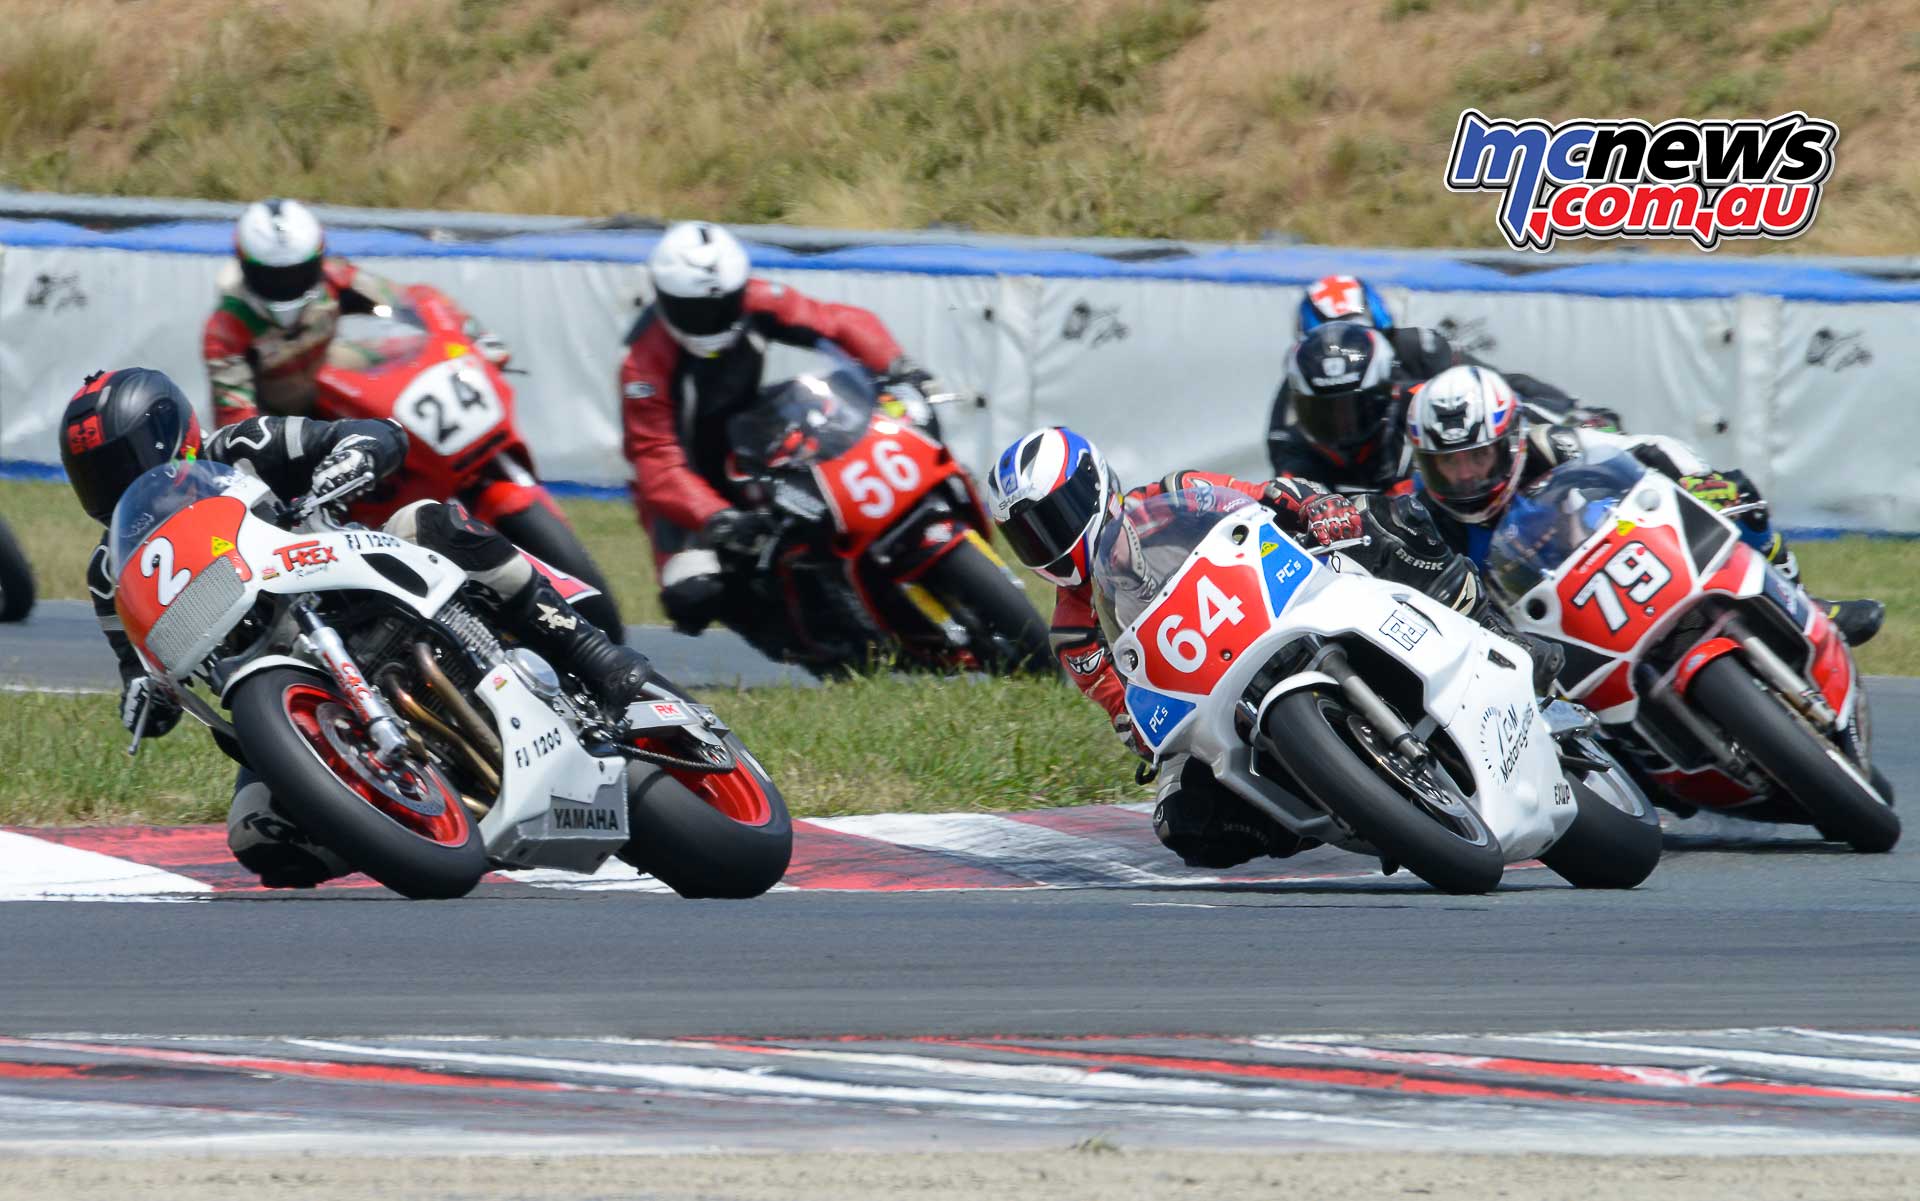 Chas Hern on the T Rex FJ1200 Yamah leads eventual championship winner Aaron Morris on an FZR1000 (1040cc) and Stephen Kairl, also mounted on a similar FZR1000 off the front straight in the Period 6 Unlimited field